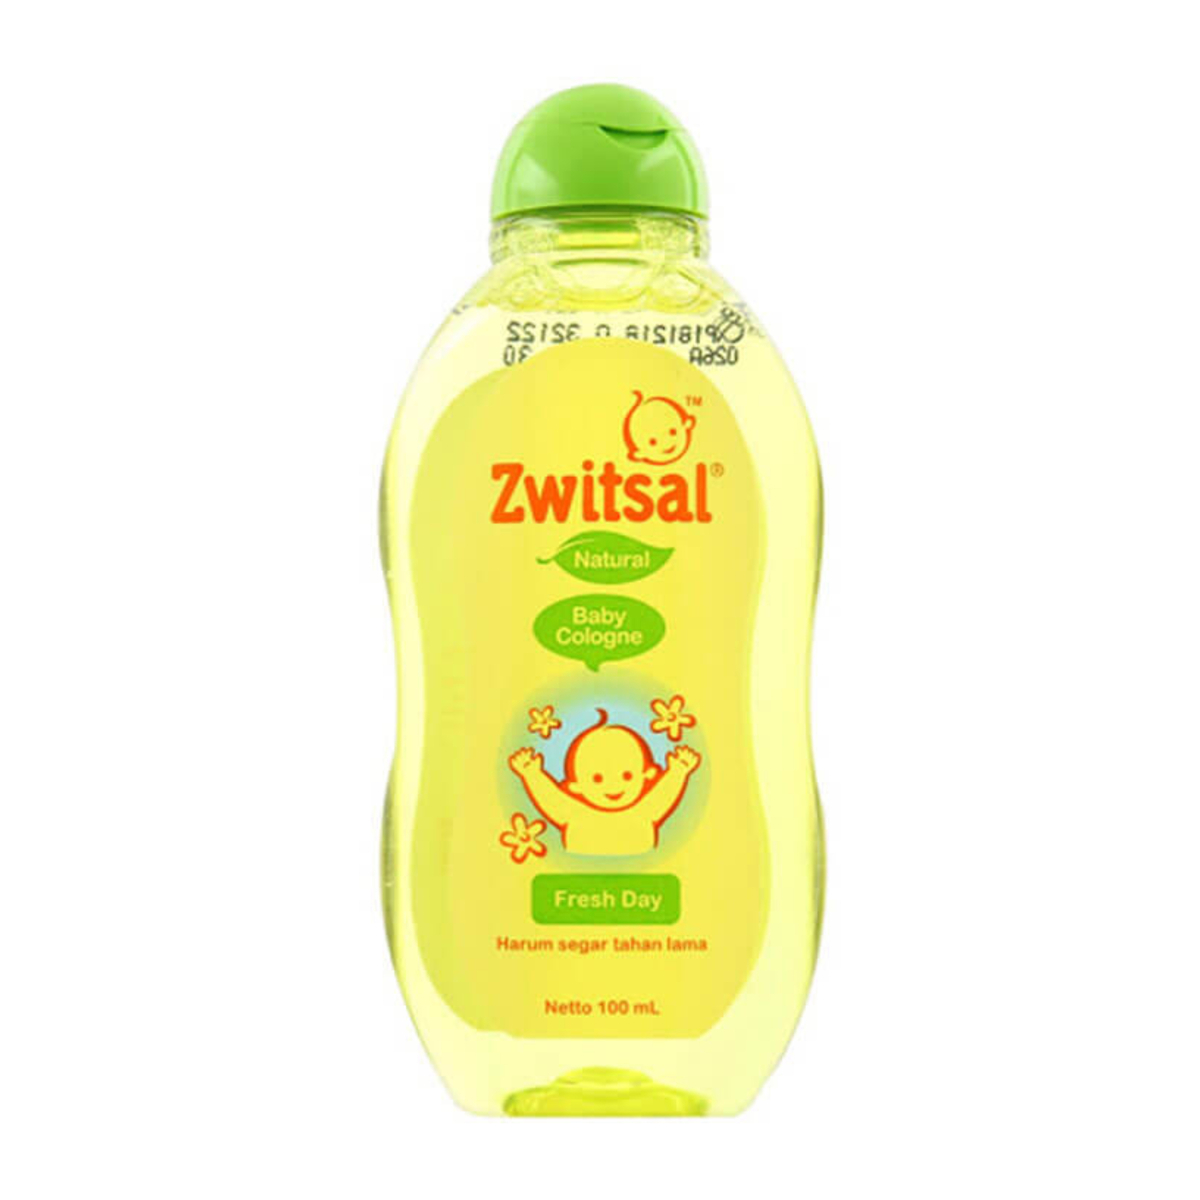 Zwitsal  Baby Cologne Natural Fresh Day 100ml